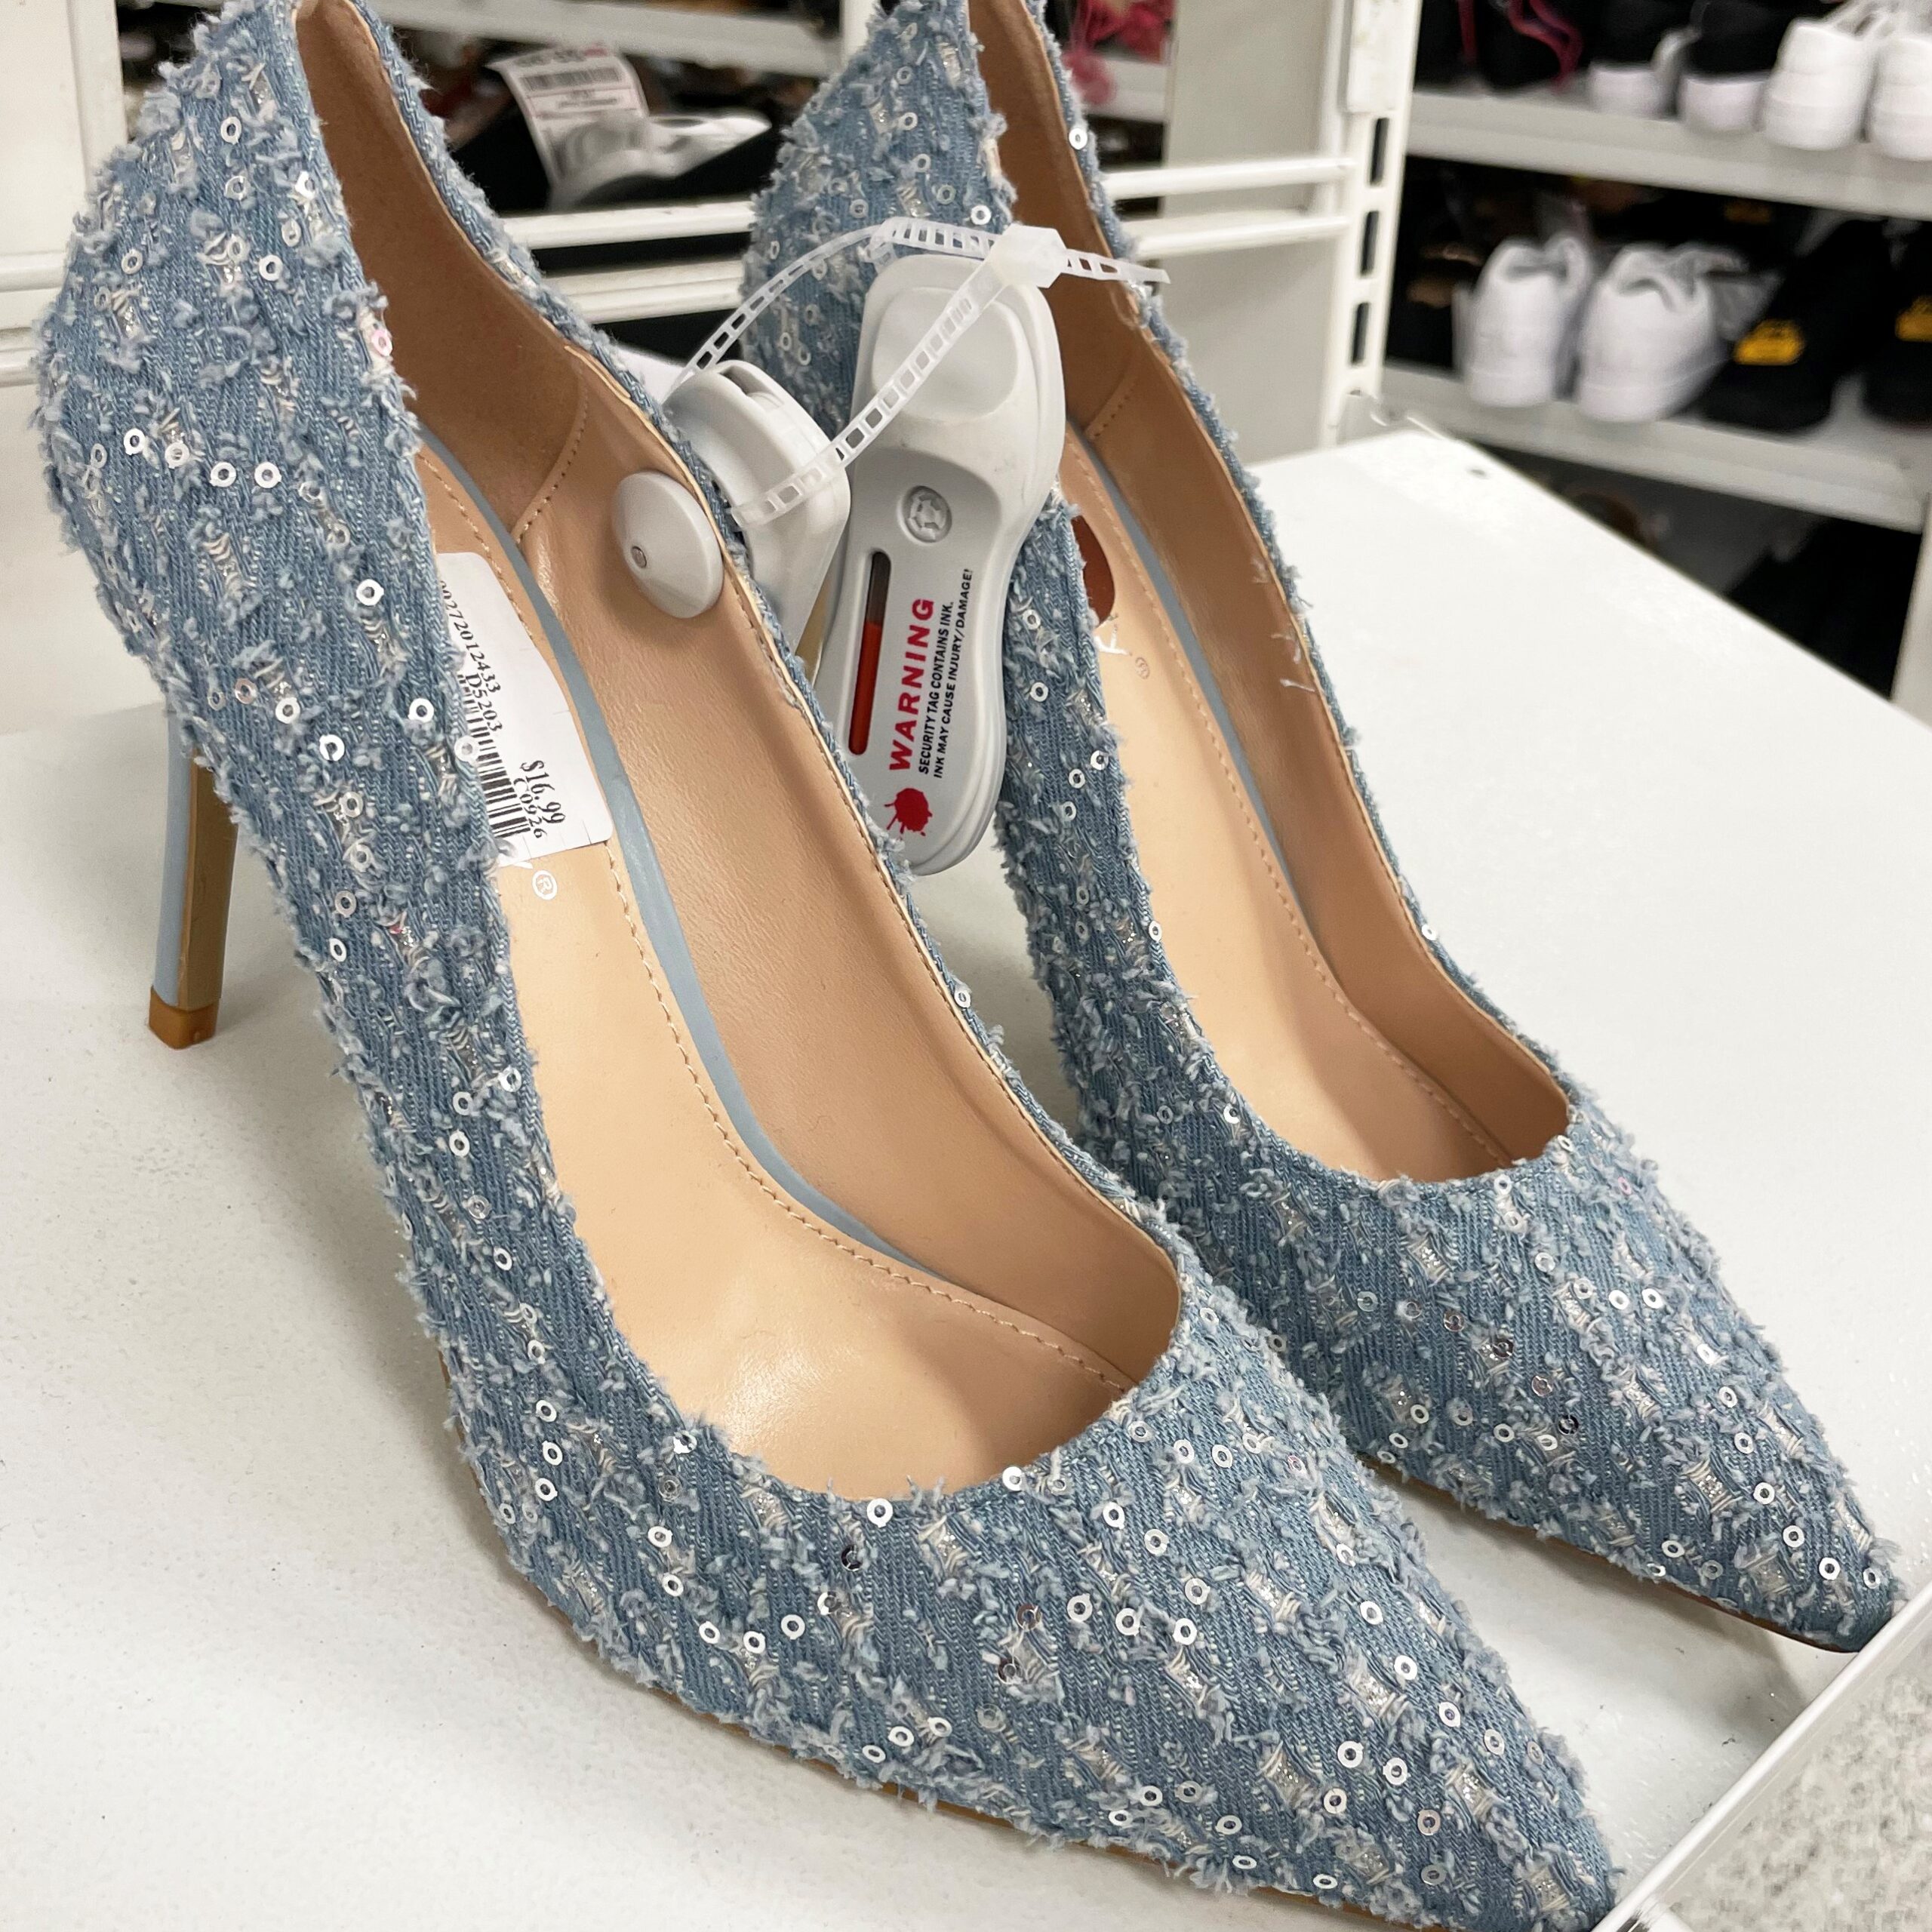 Denim and sequined high heels for a great value at dd's discounts